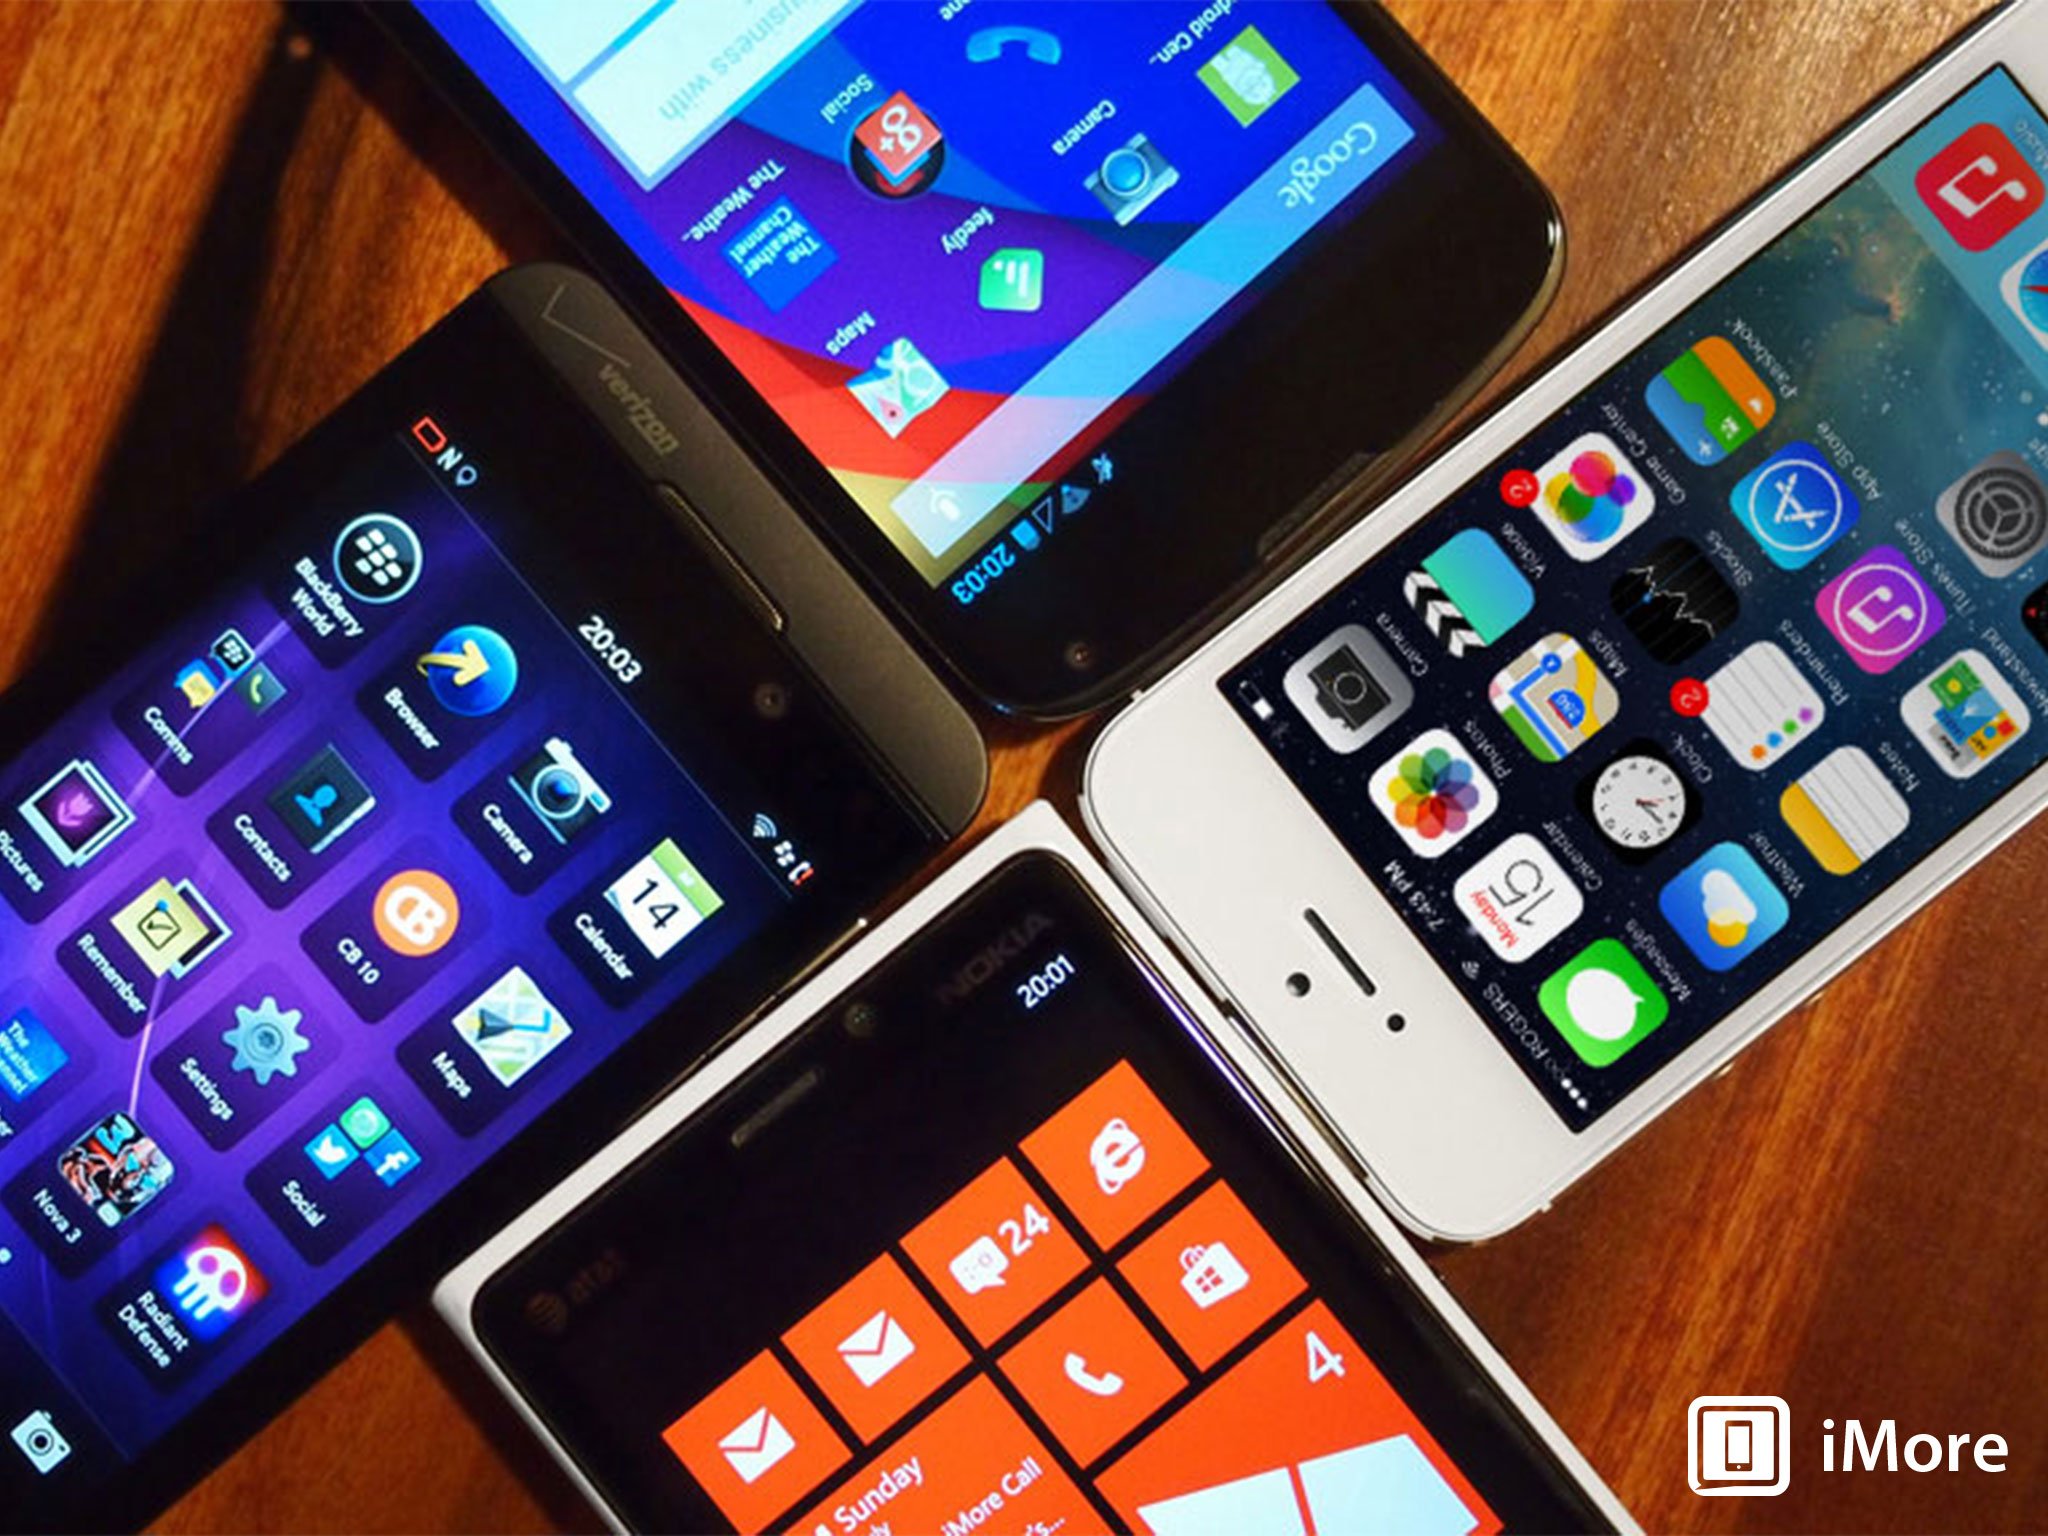 Should you get an iPhone 6 or and Android, BlackBerry, or Windows Phone?